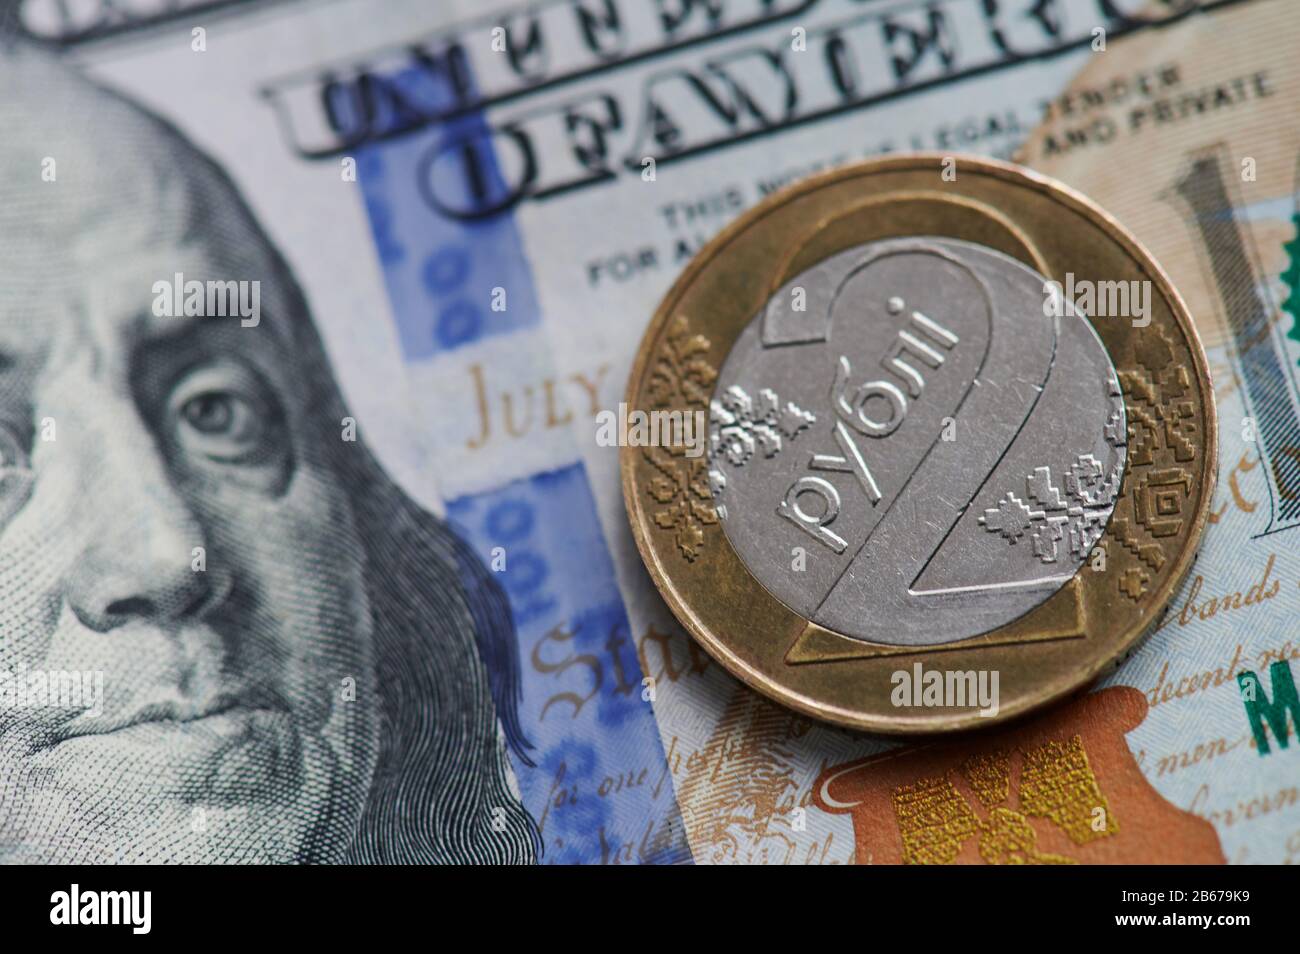 Belarusian coin on dollar banknote bill close up view Stock Photo